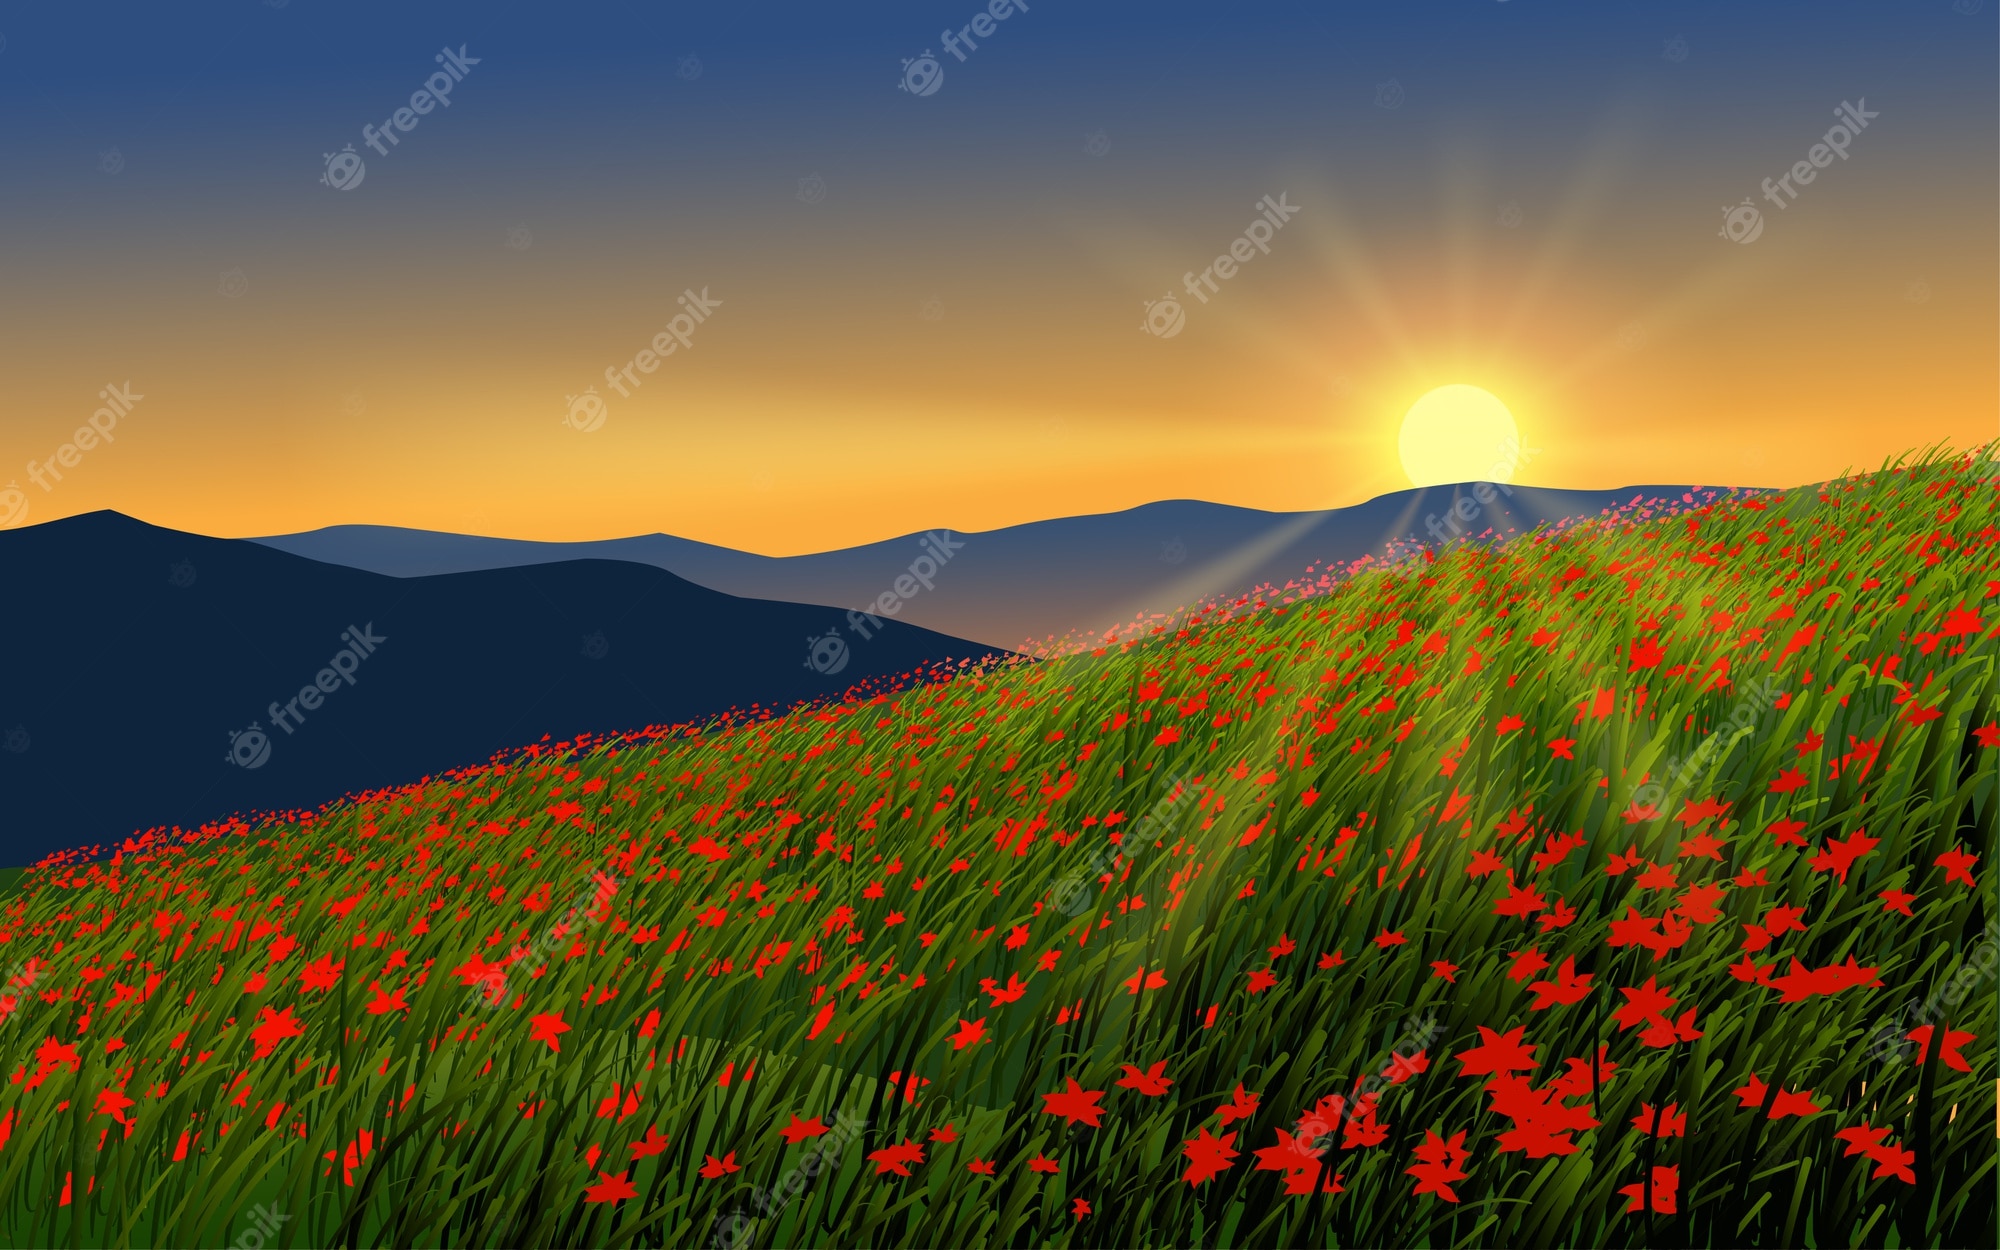 Sunset Over Mountain Field Wallpapers